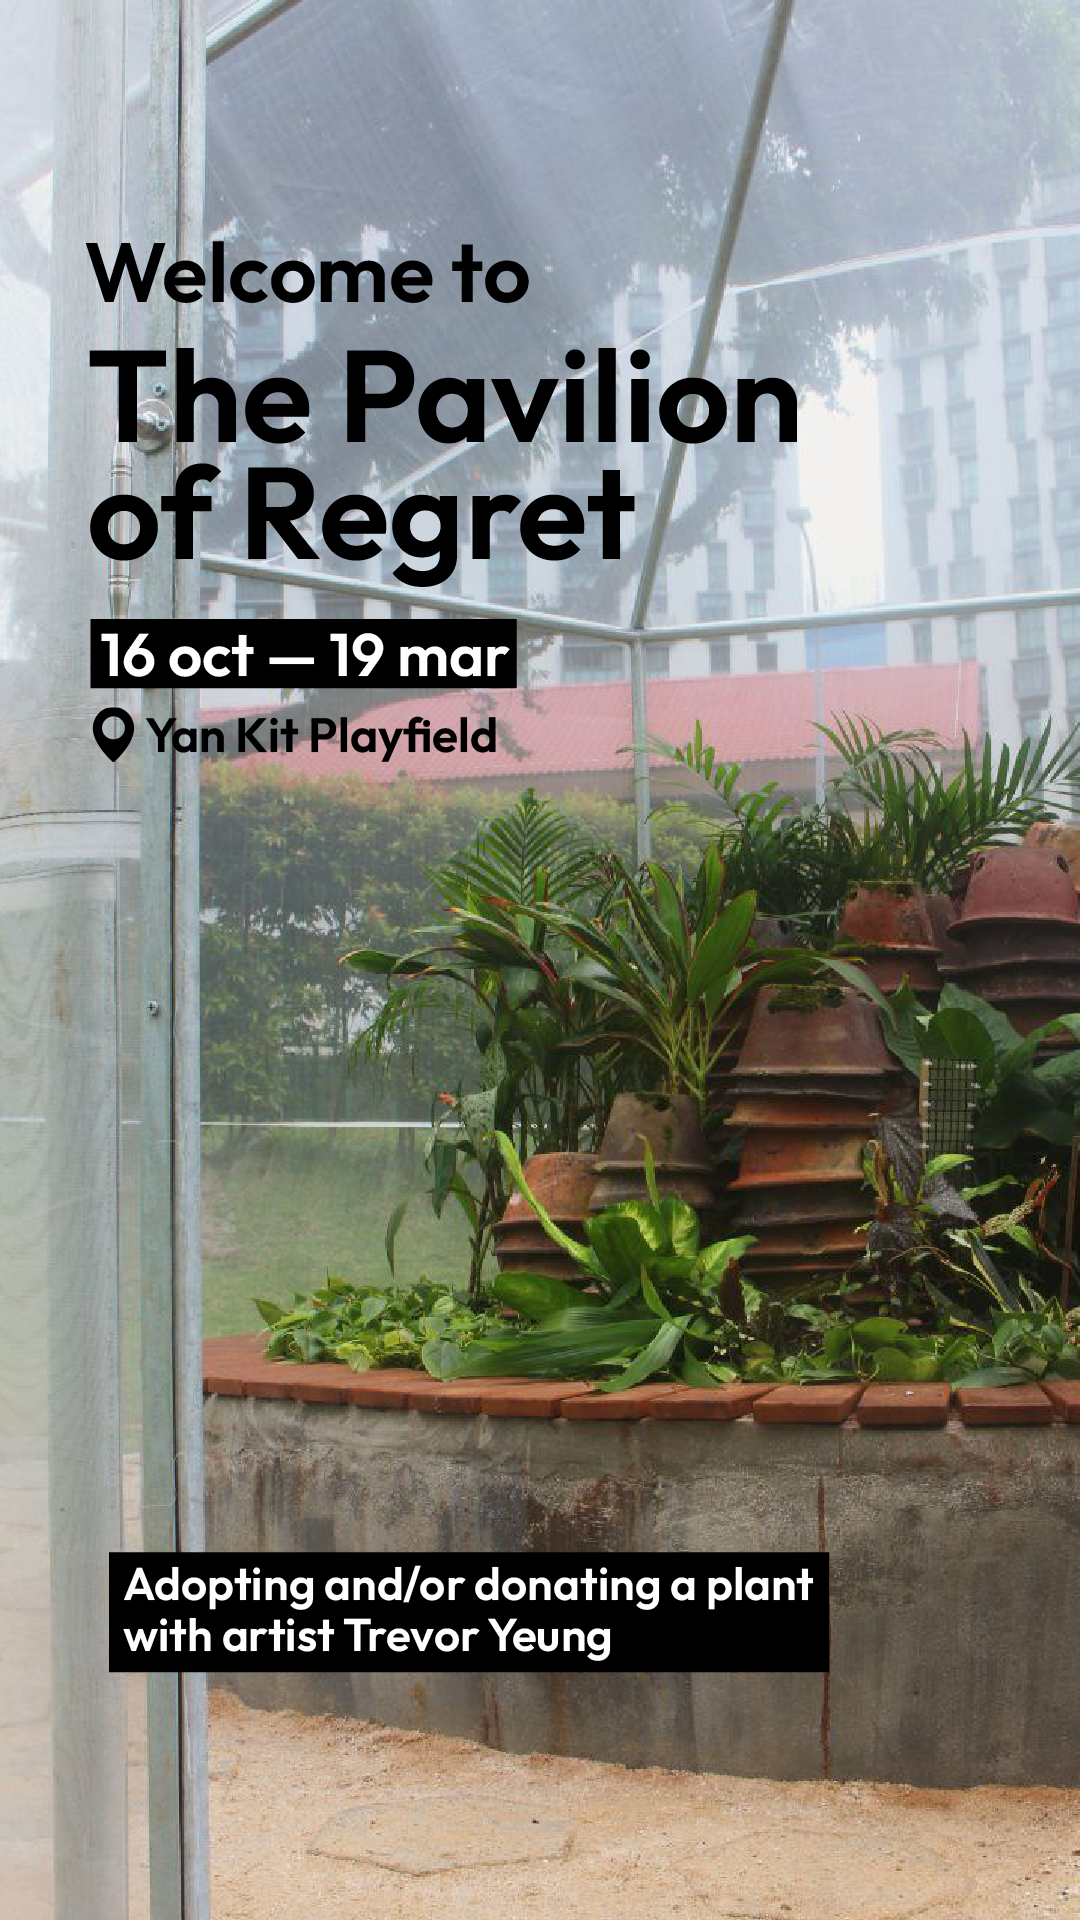 Trevor Yeung’s commission project “The Pavilion of Regret” is now on view in Singapore Biennale